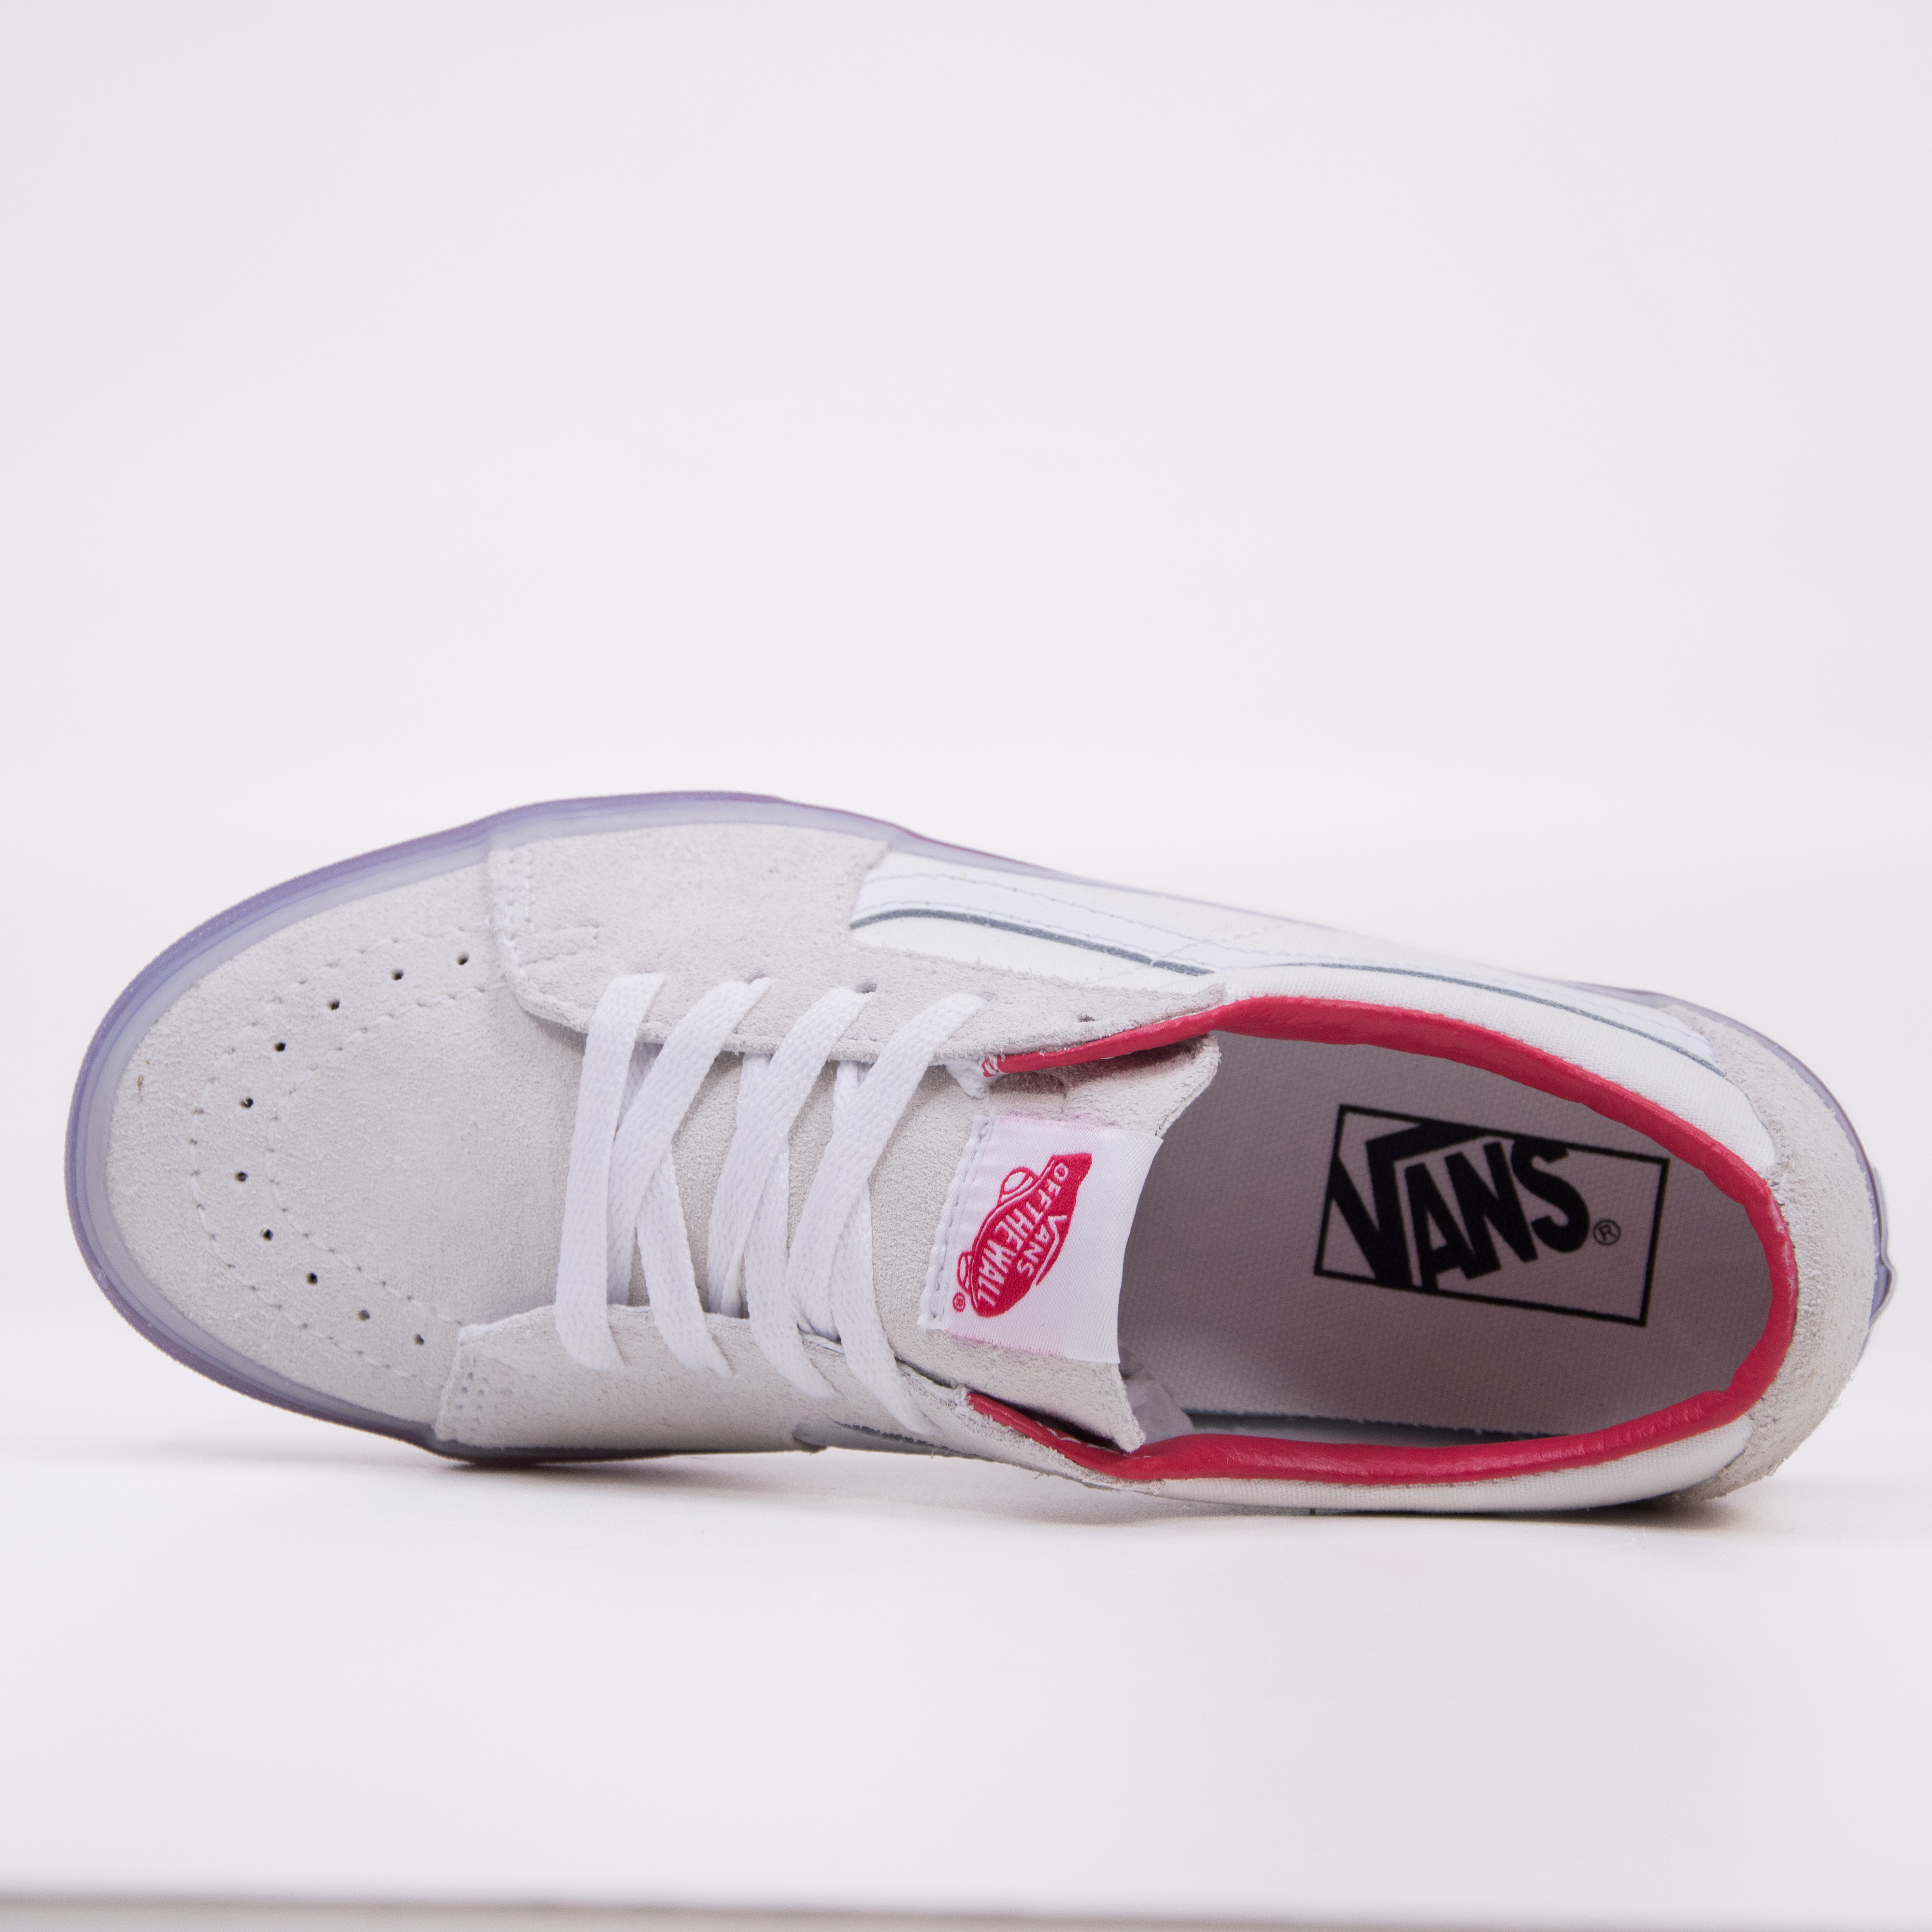 Vans - SK8-LOW - Translucent Sidewall White/Red